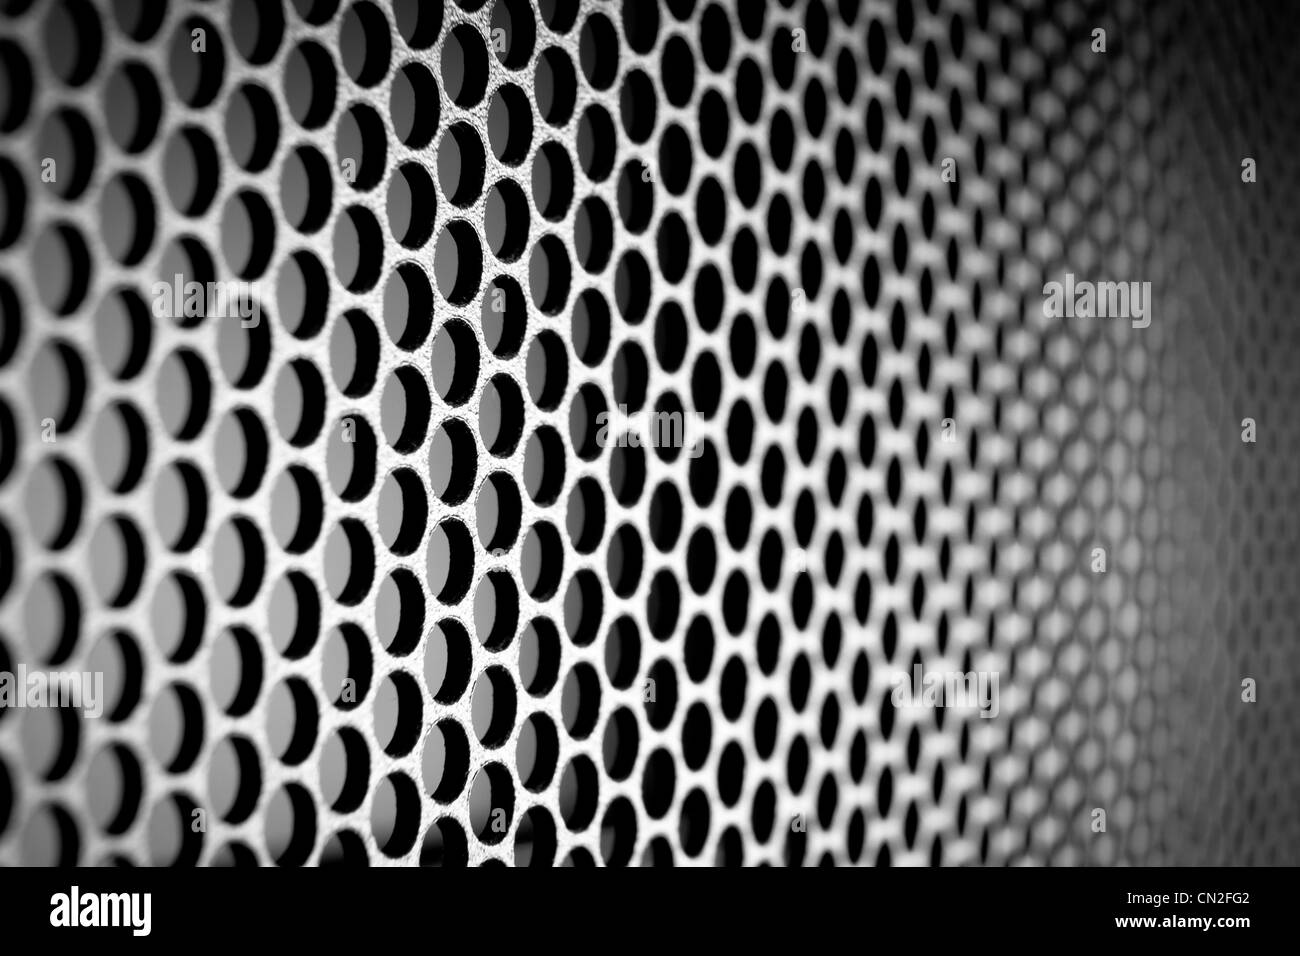 abstract metal grid background Stock Photo